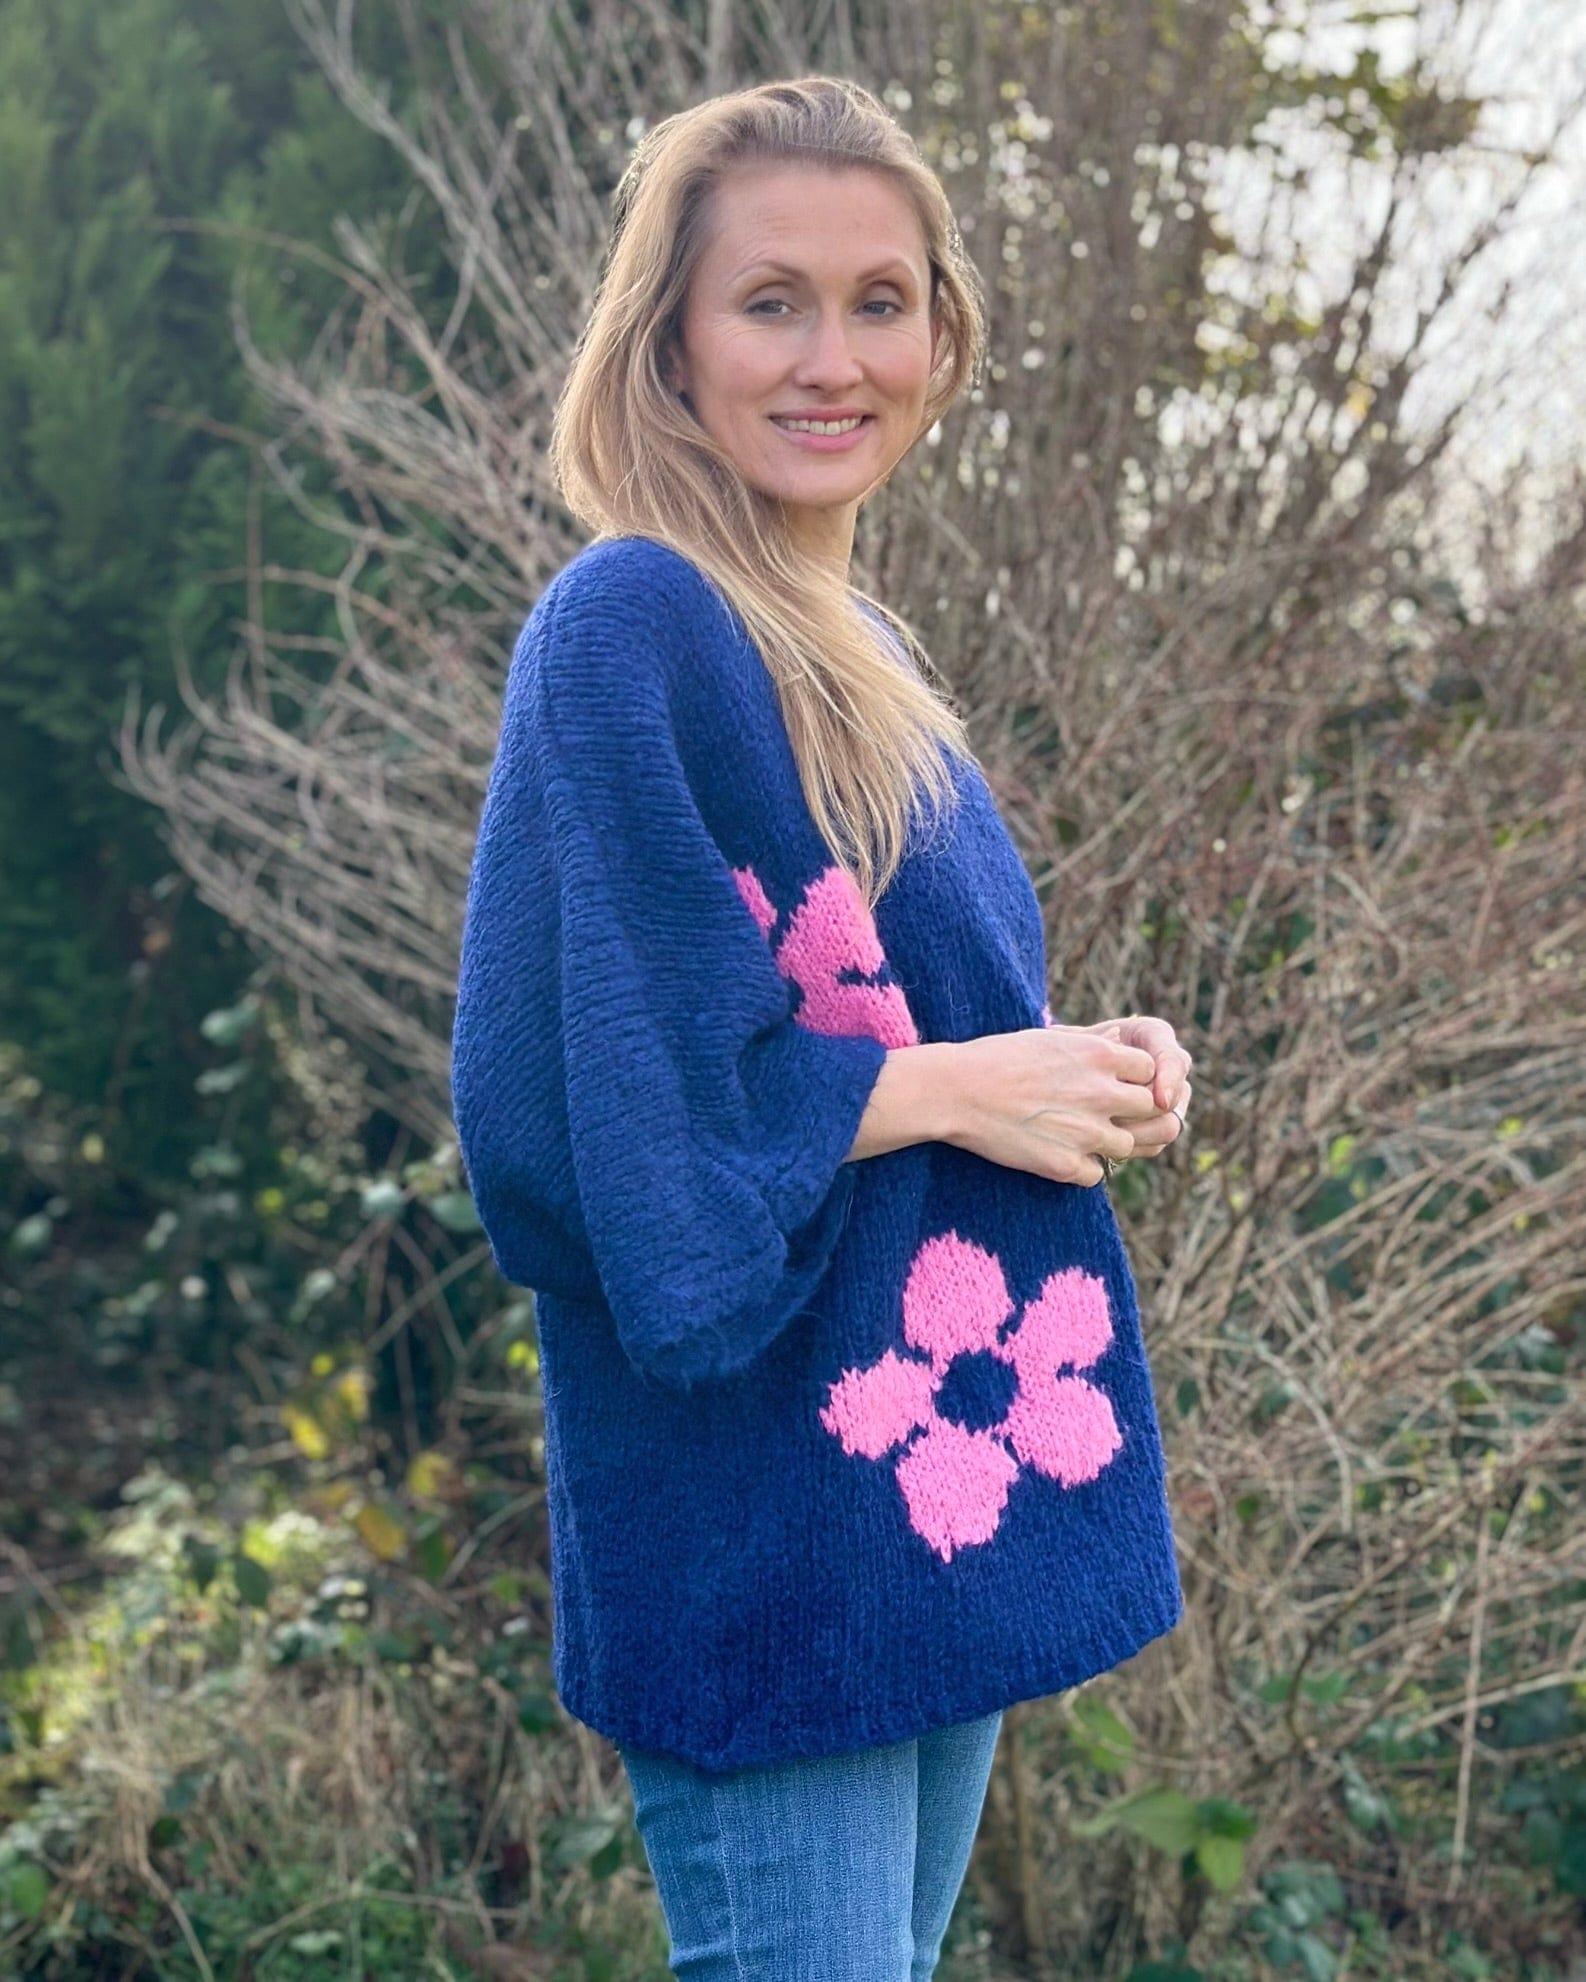 clothing Chunky Knit Flower Jumper - Navy/Pink